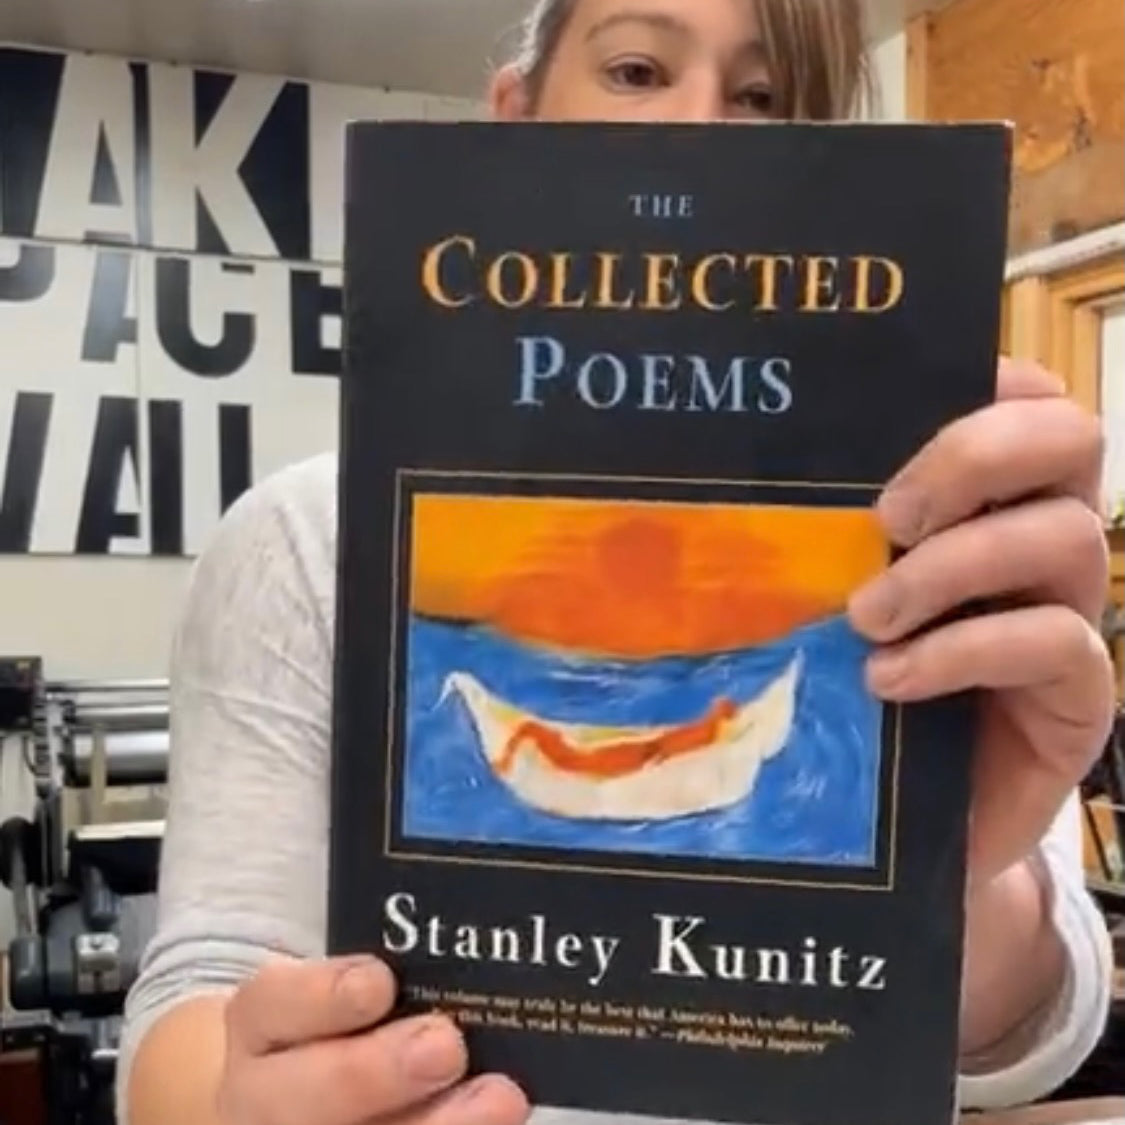 Reading “The Layers” by Stanley Kunitz